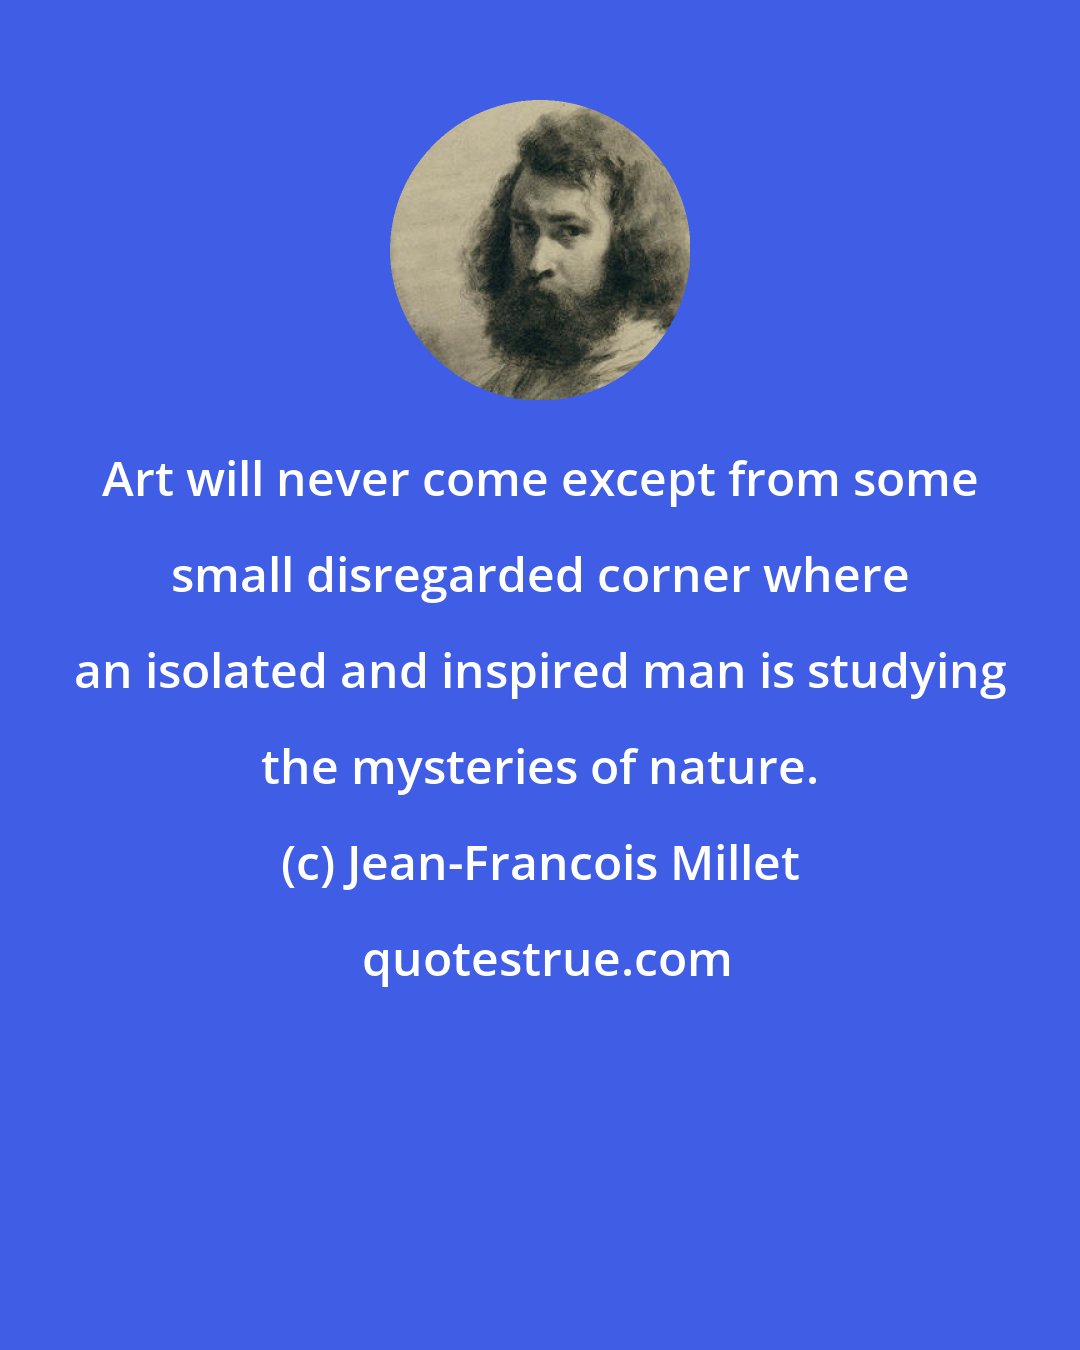 Jean-Francois Millet: Art will never come except from some small disregarded corner where an isolated and inspired man is studying the mysteries of nature.